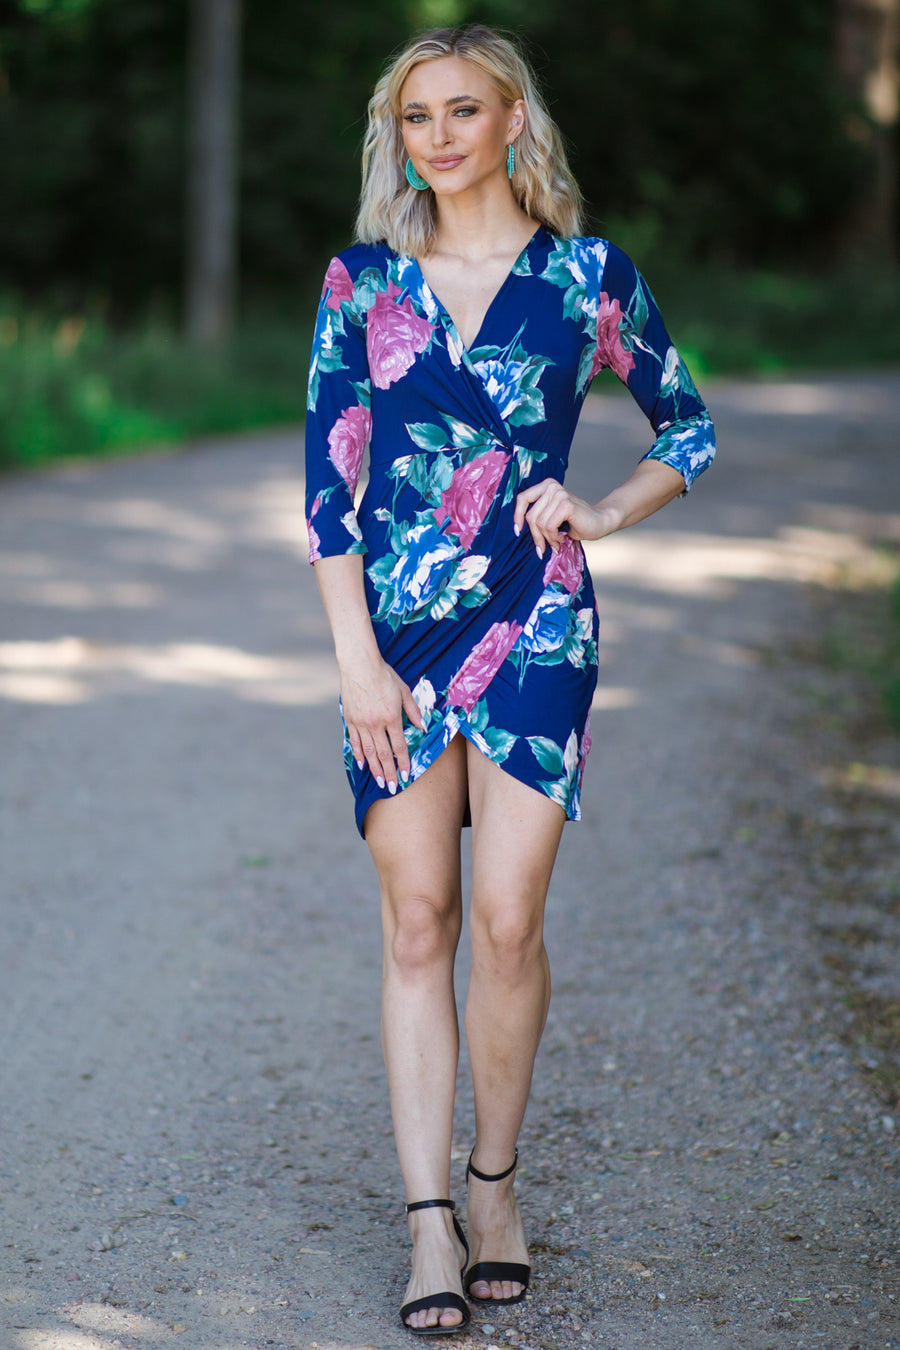 Navy and Dusty Rose Floral Print Dress - Filly Flair